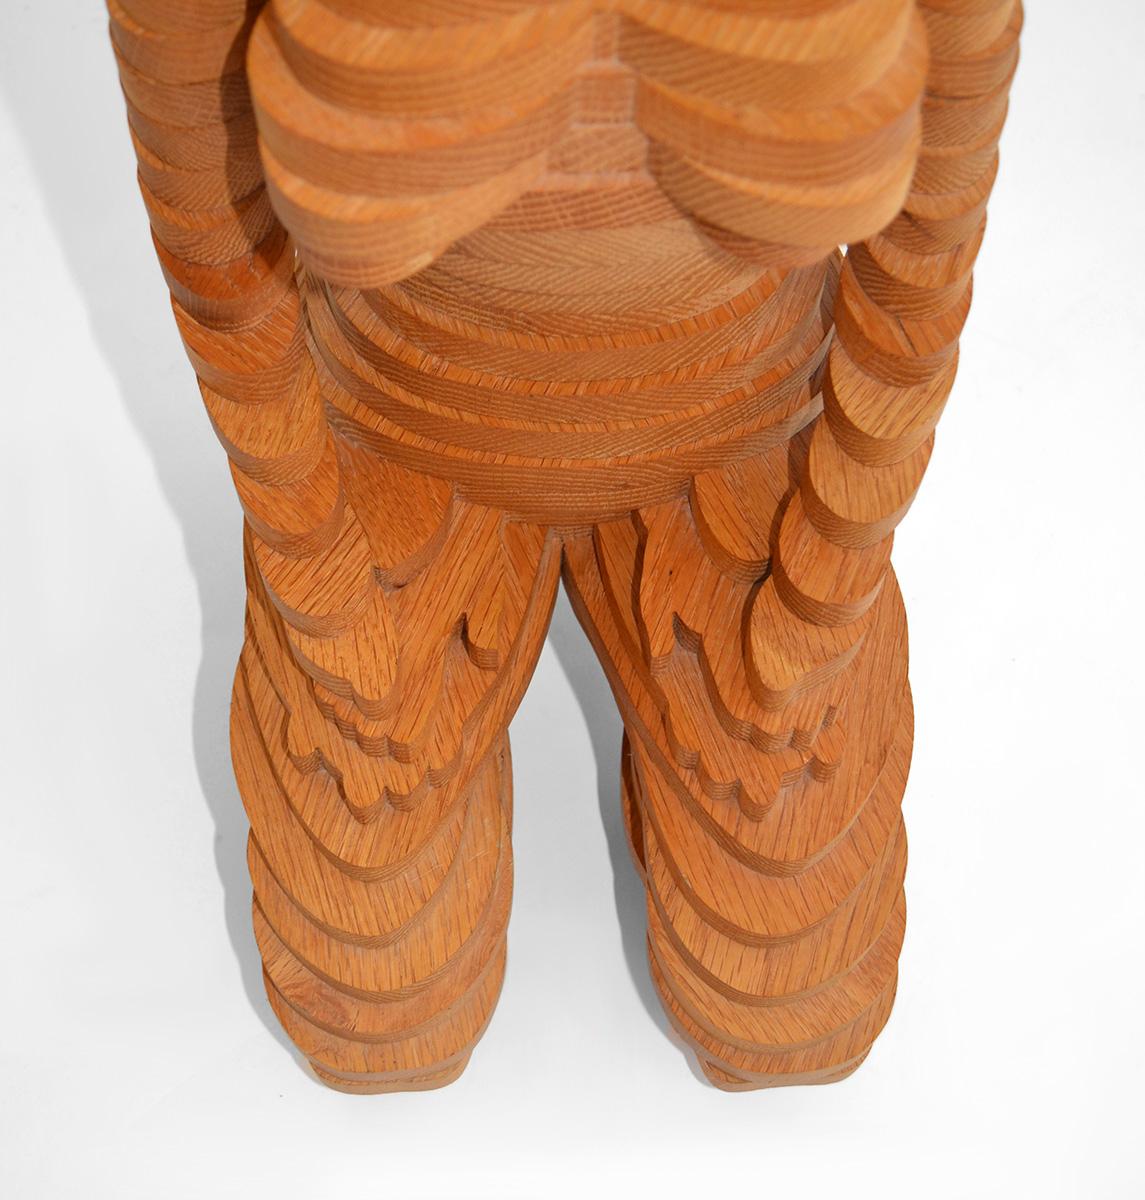 Female Sculpture in Joined Wood 3-D Cubist Surrealist by Reuben Karol, USA 1990s For Sale 3